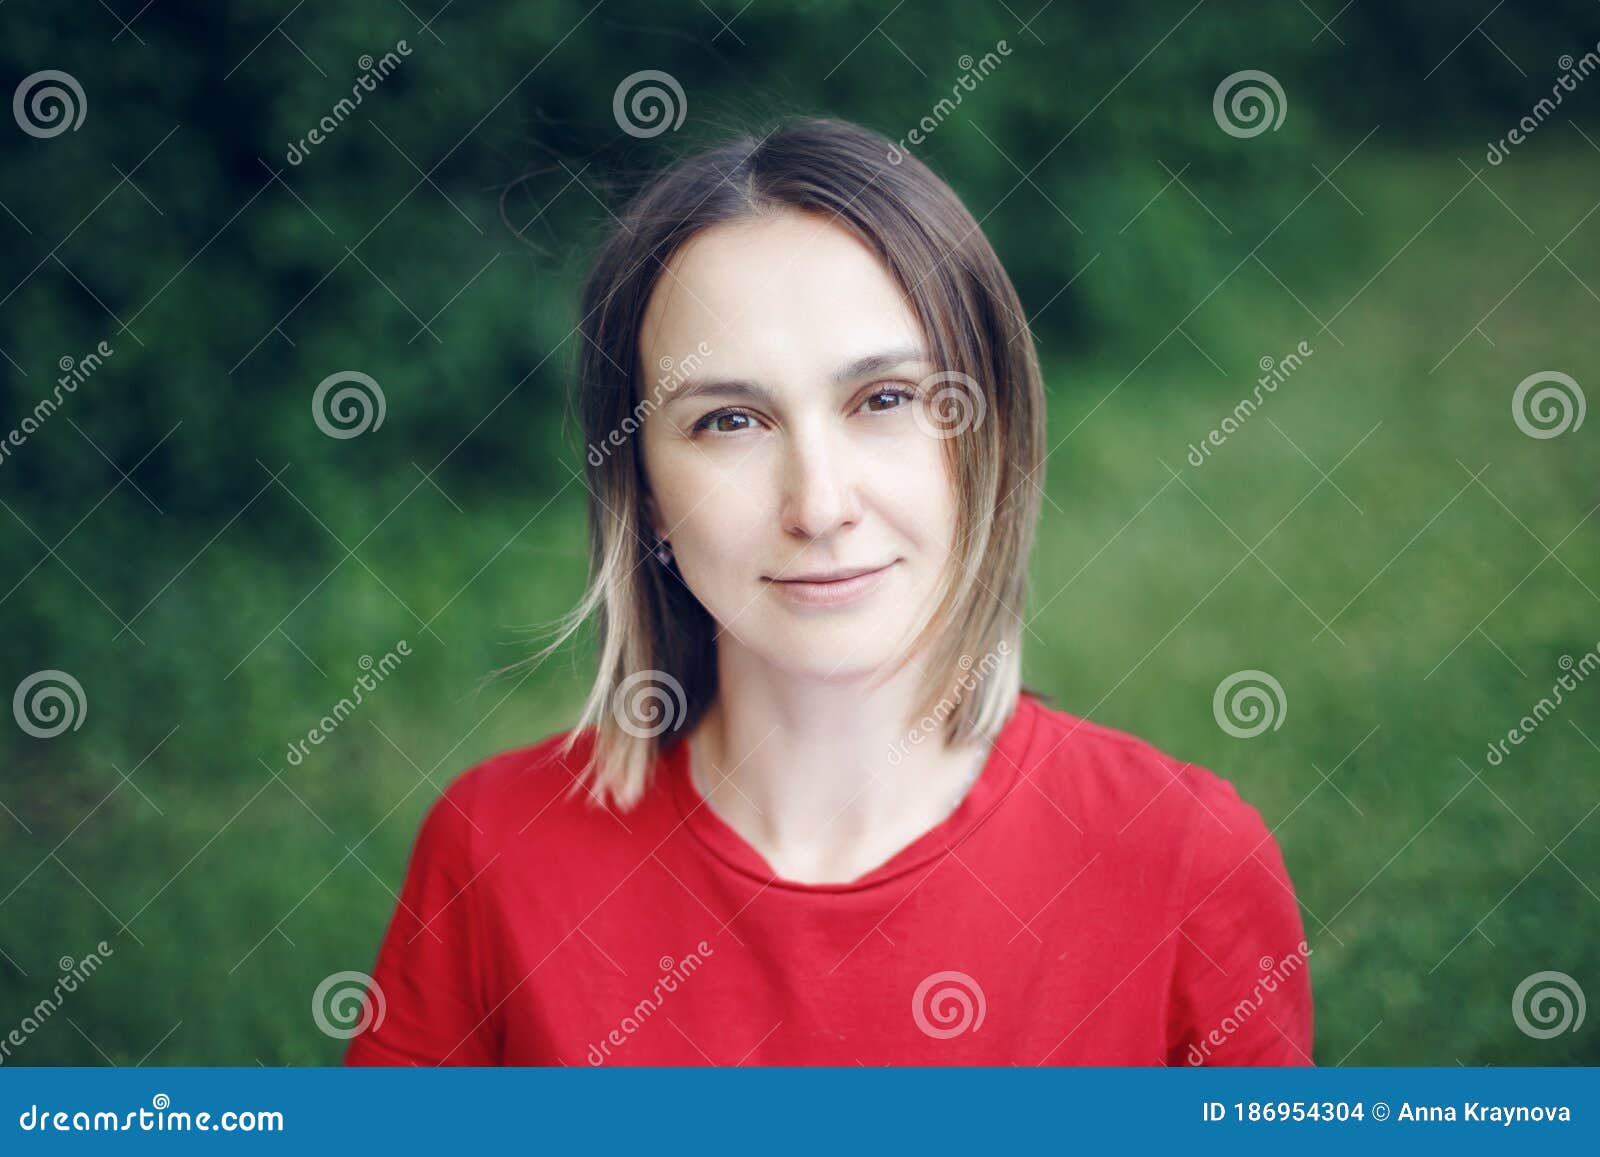 Portrait Head Shot of Beautiful Pensive Caucasian Middle Age Woman with ...